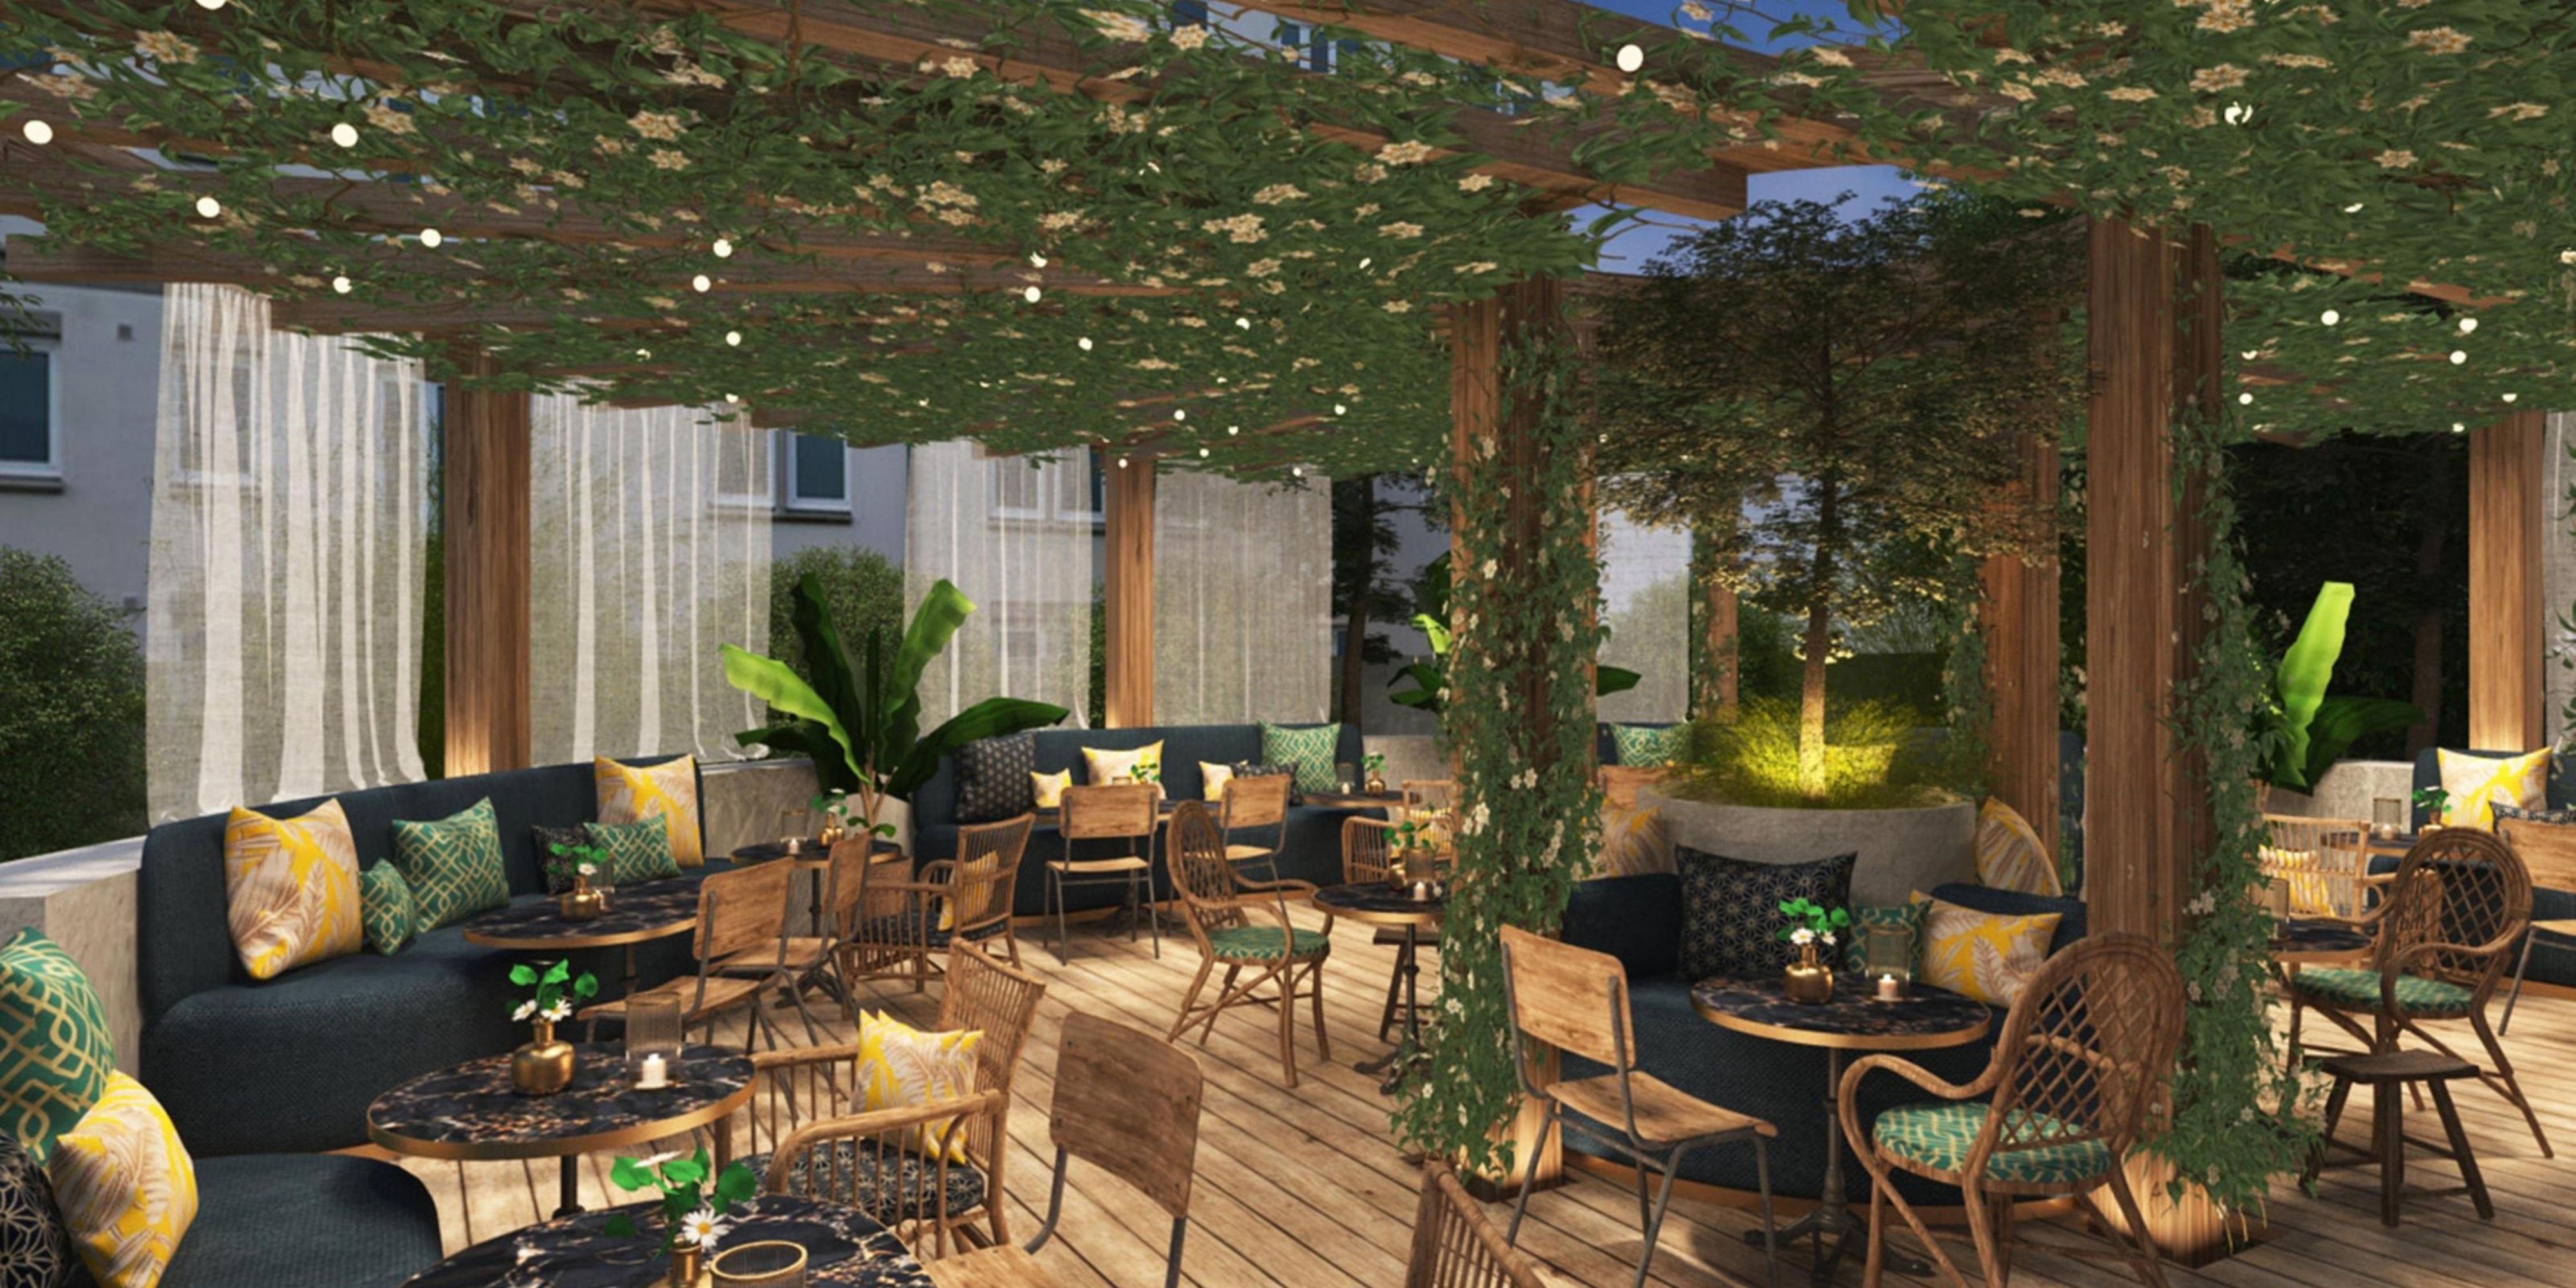 Live the cosy vibe of our green patio